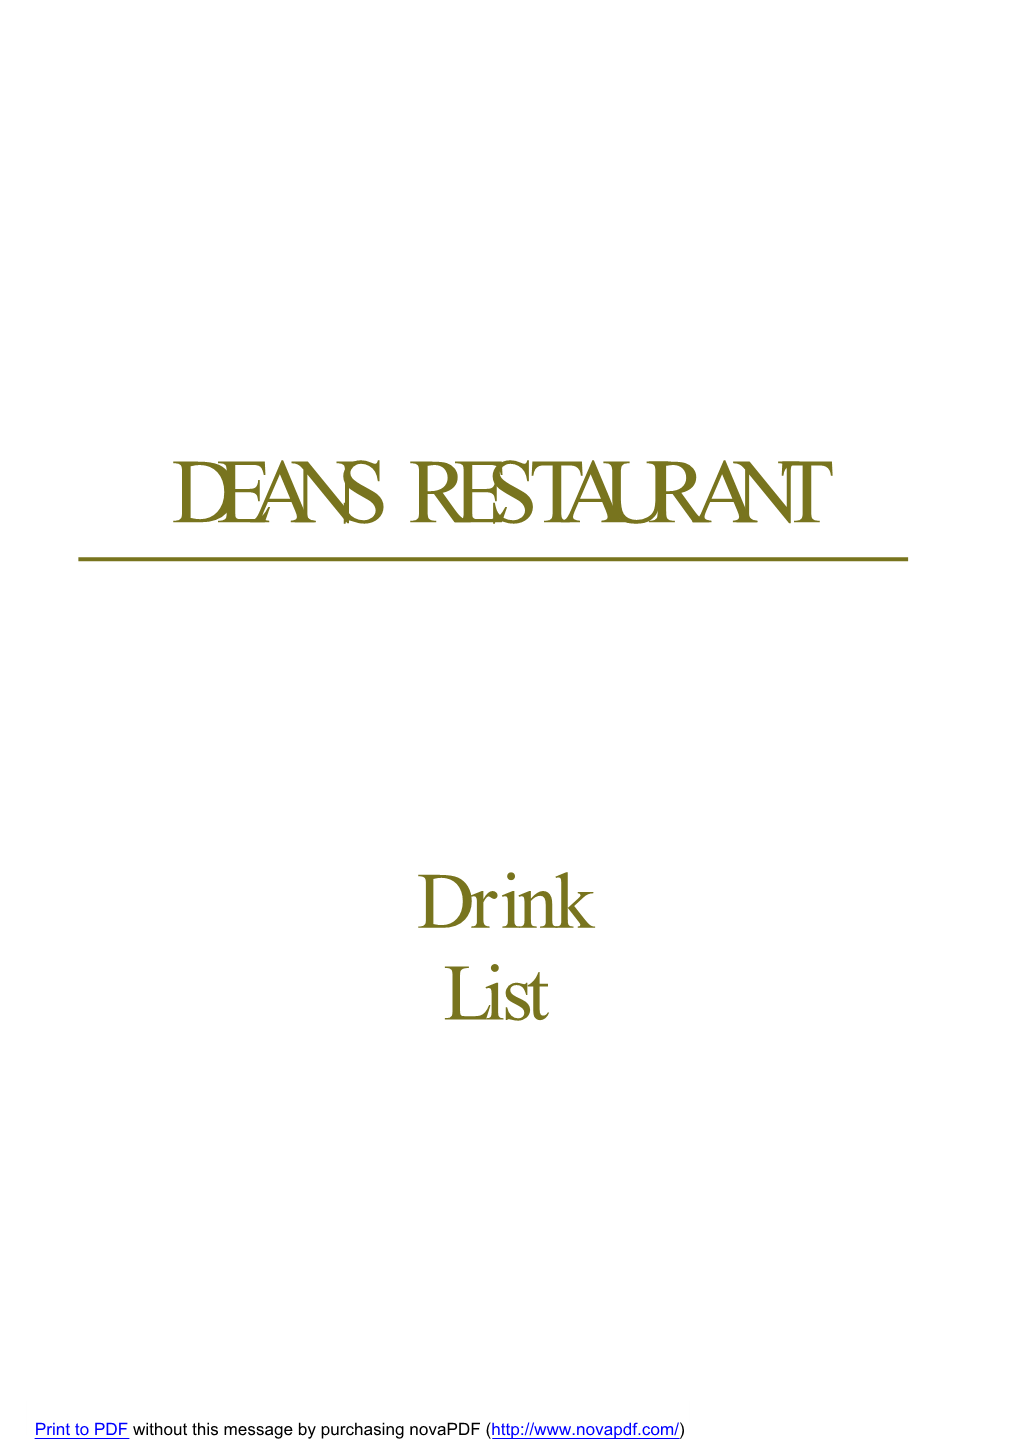 Our Full Wine List with Beers & Gins Can Be Viewed